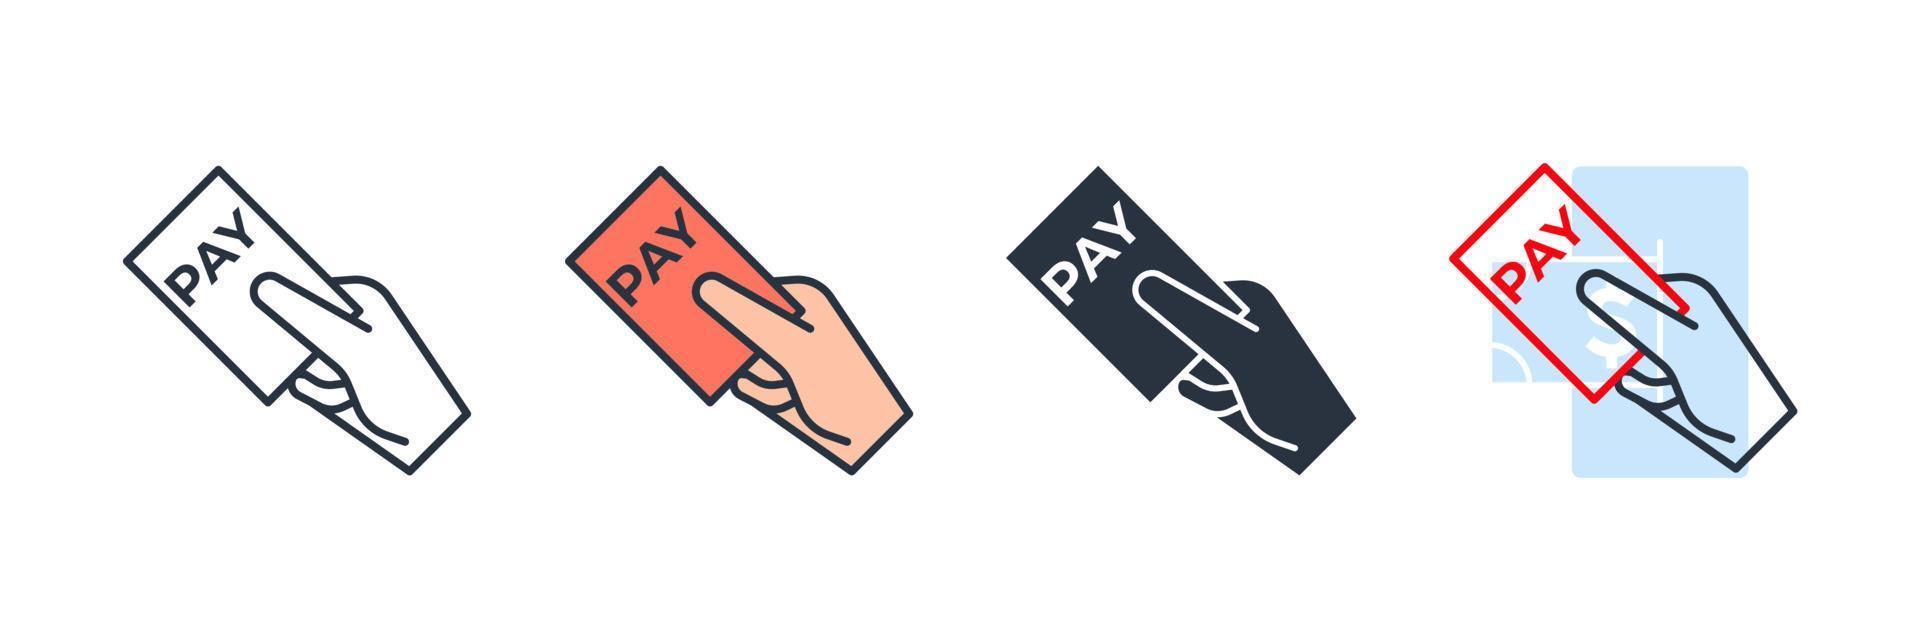 payment icon logo vector illustration. Credit card payment symbol template for graphic and web design collection